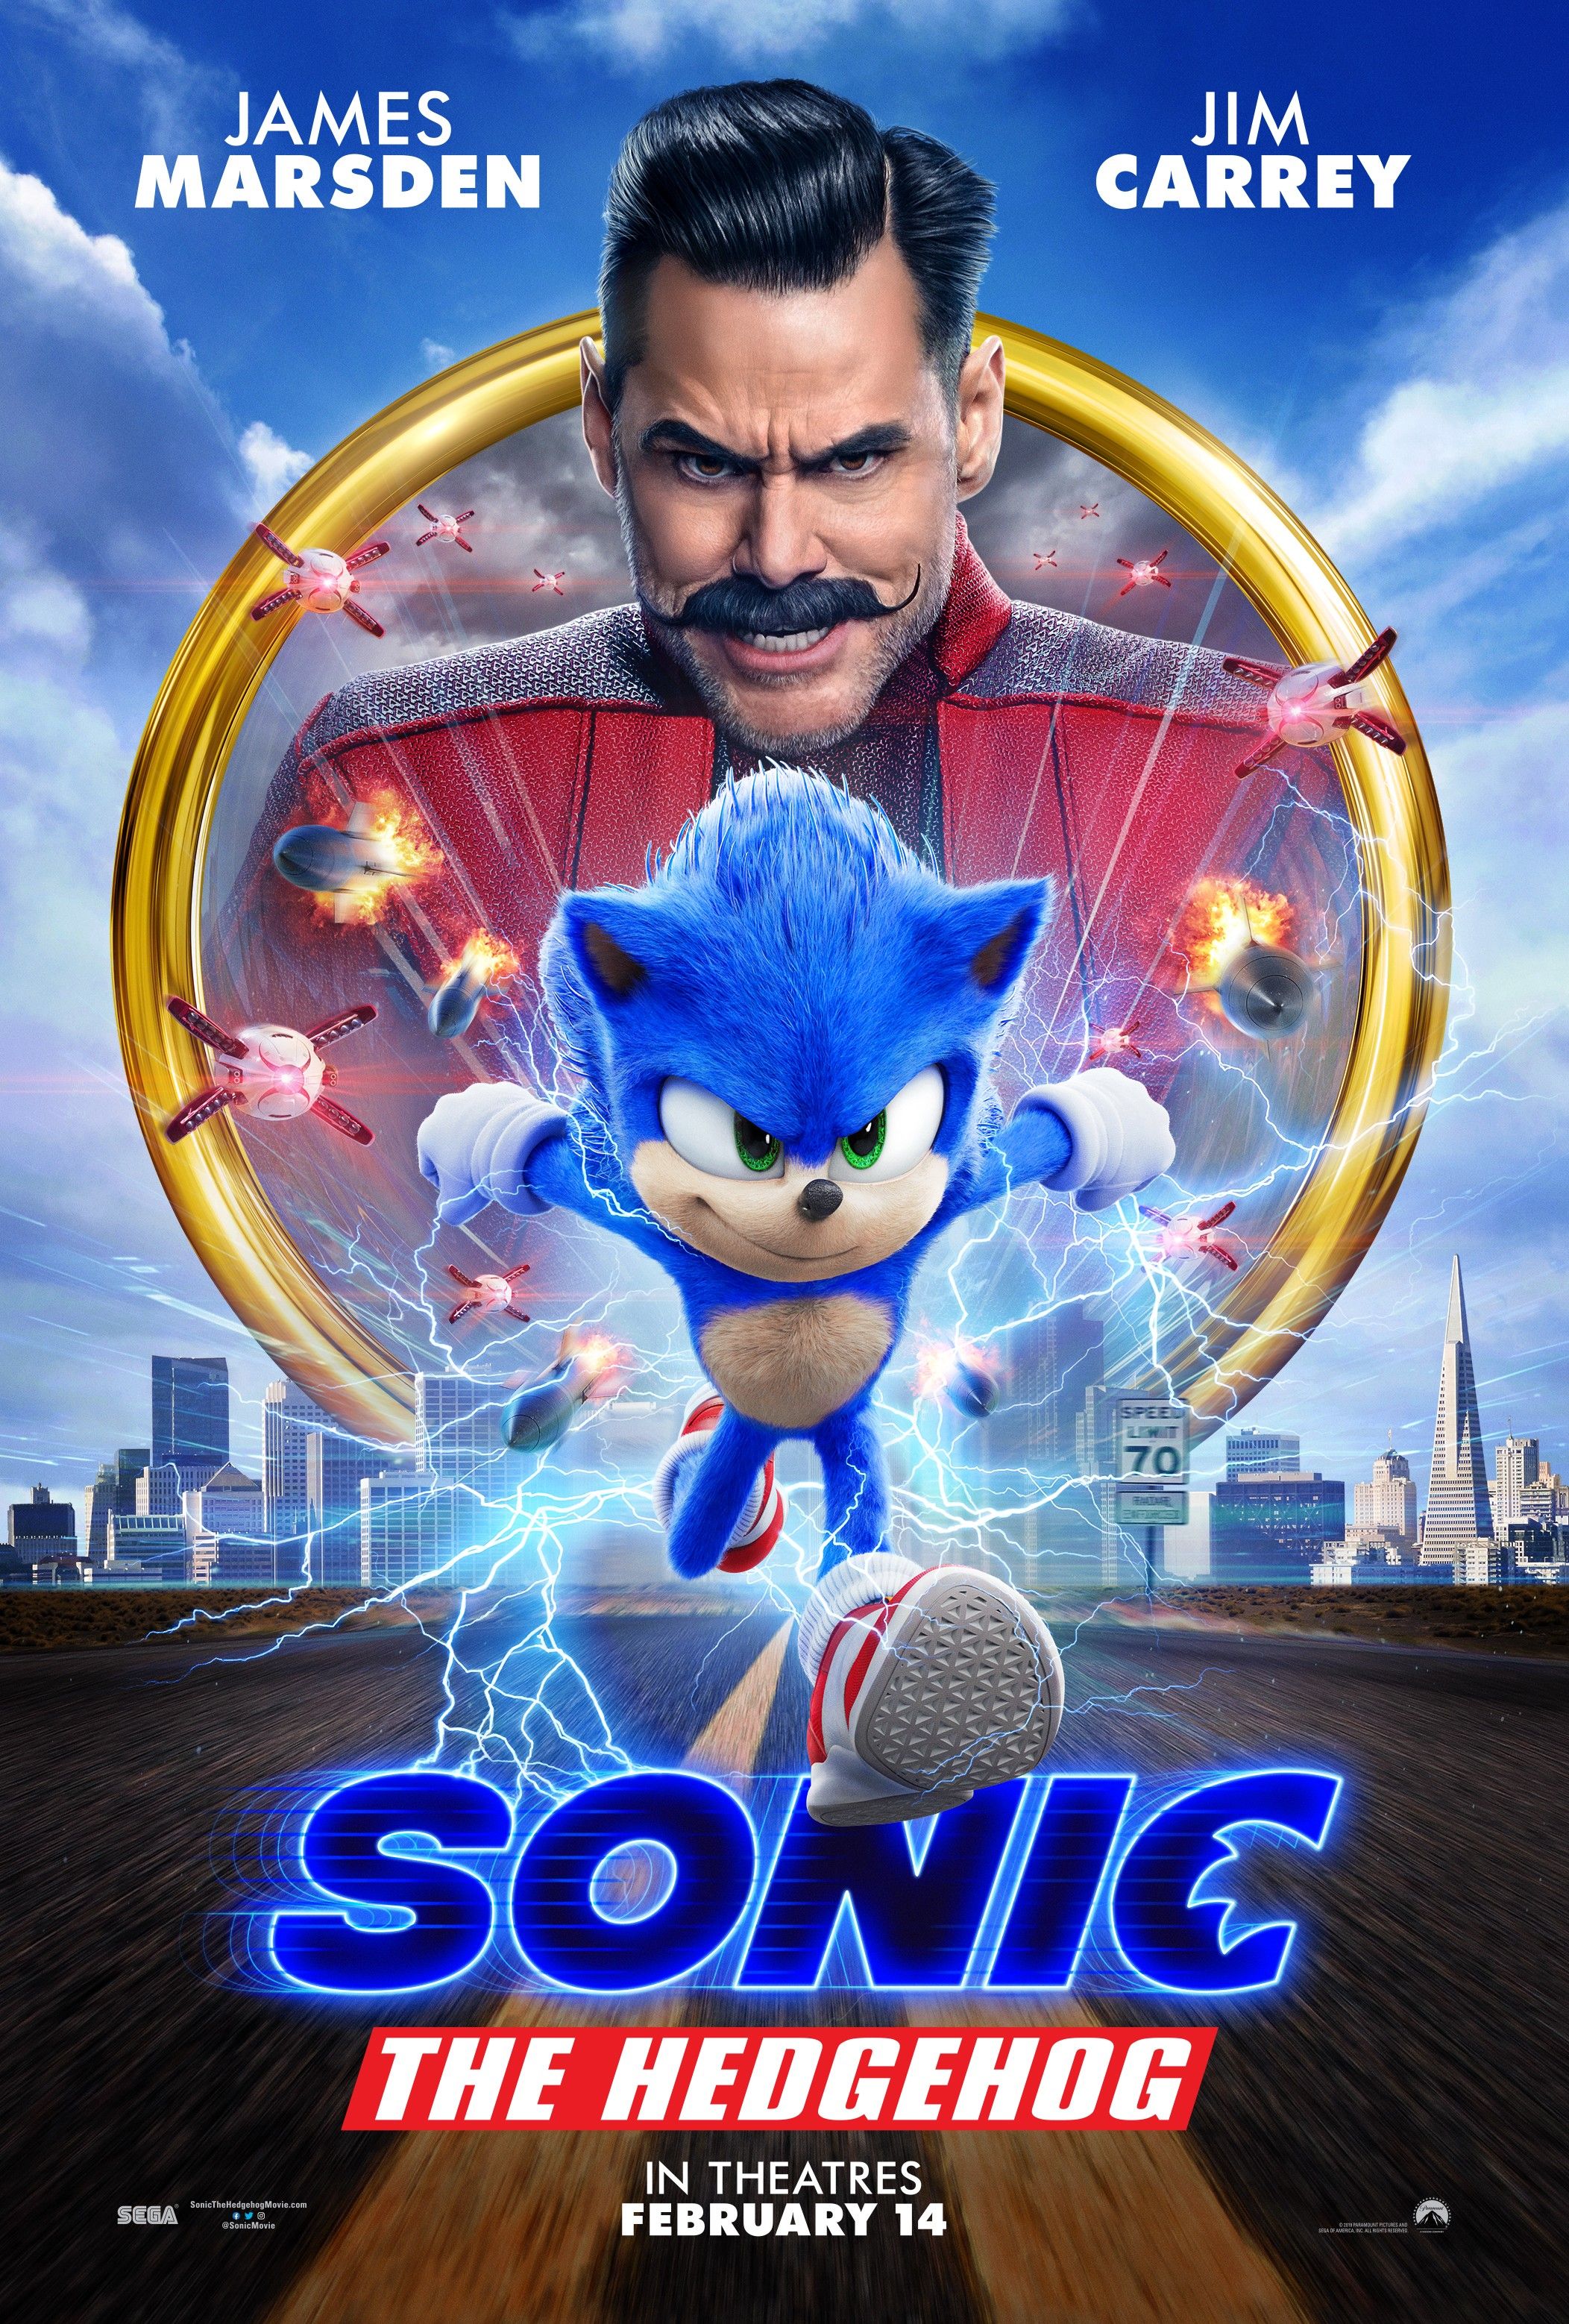 Sonic the Hedgehog 2020 movie redesign poster